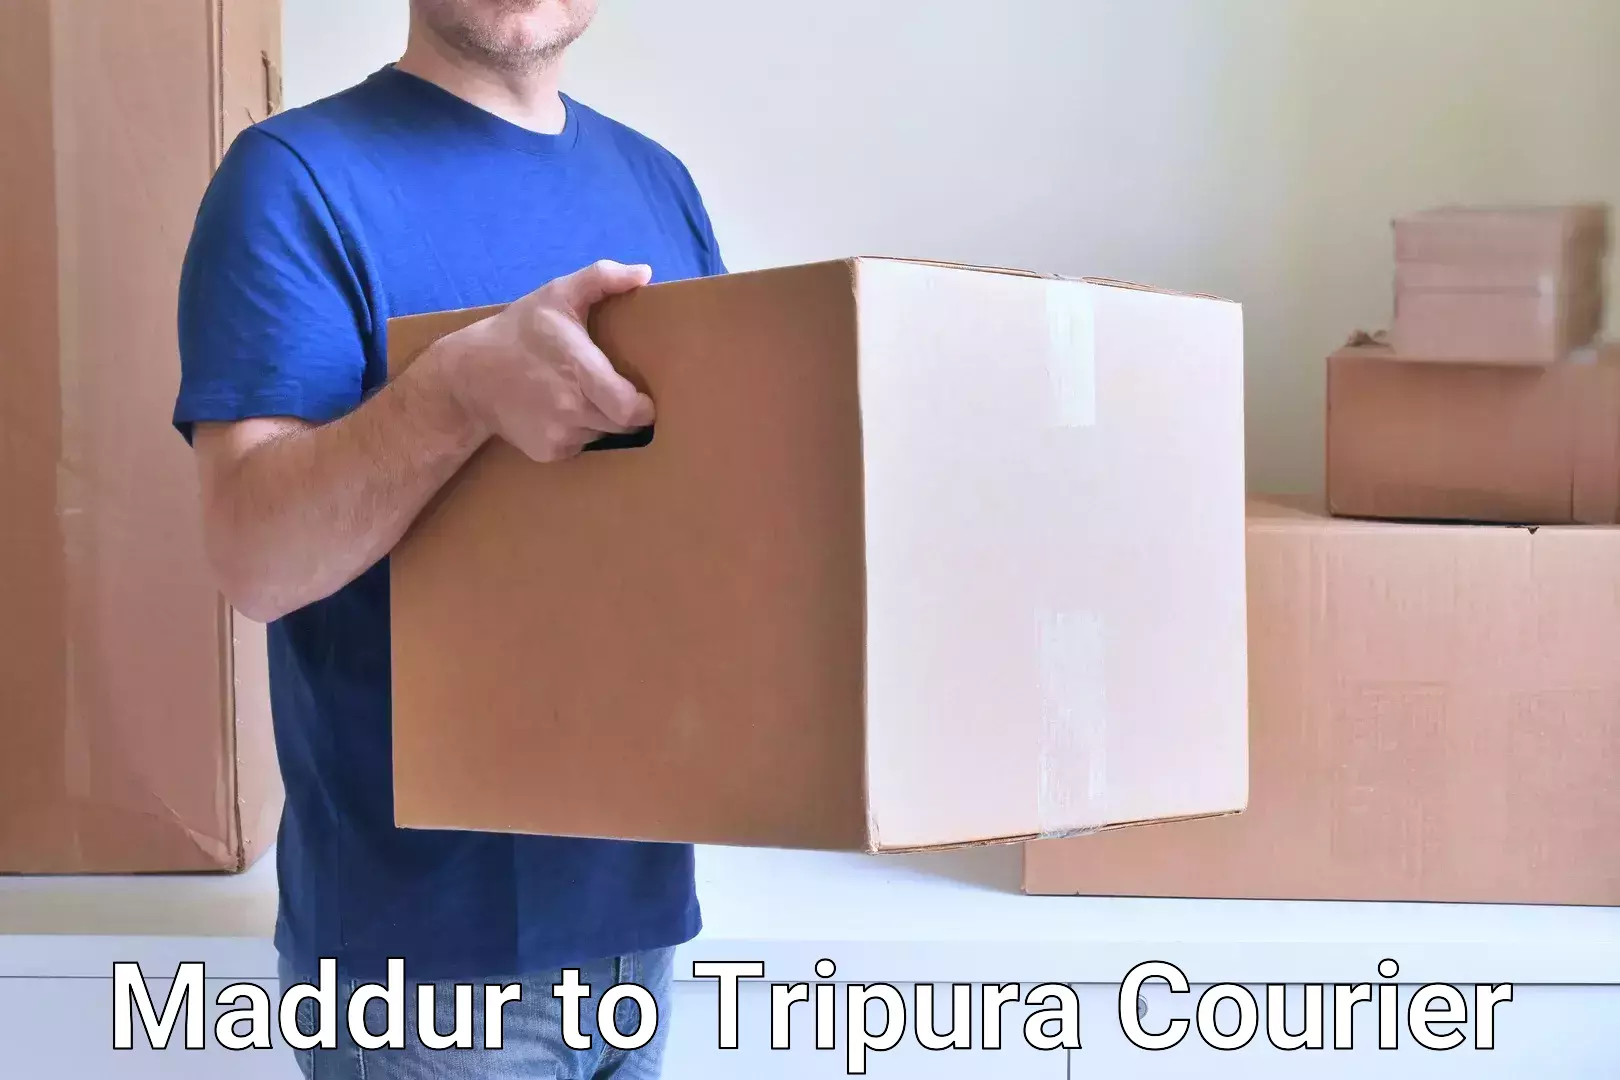 Sustainable delivery practices Maddur to Tripura